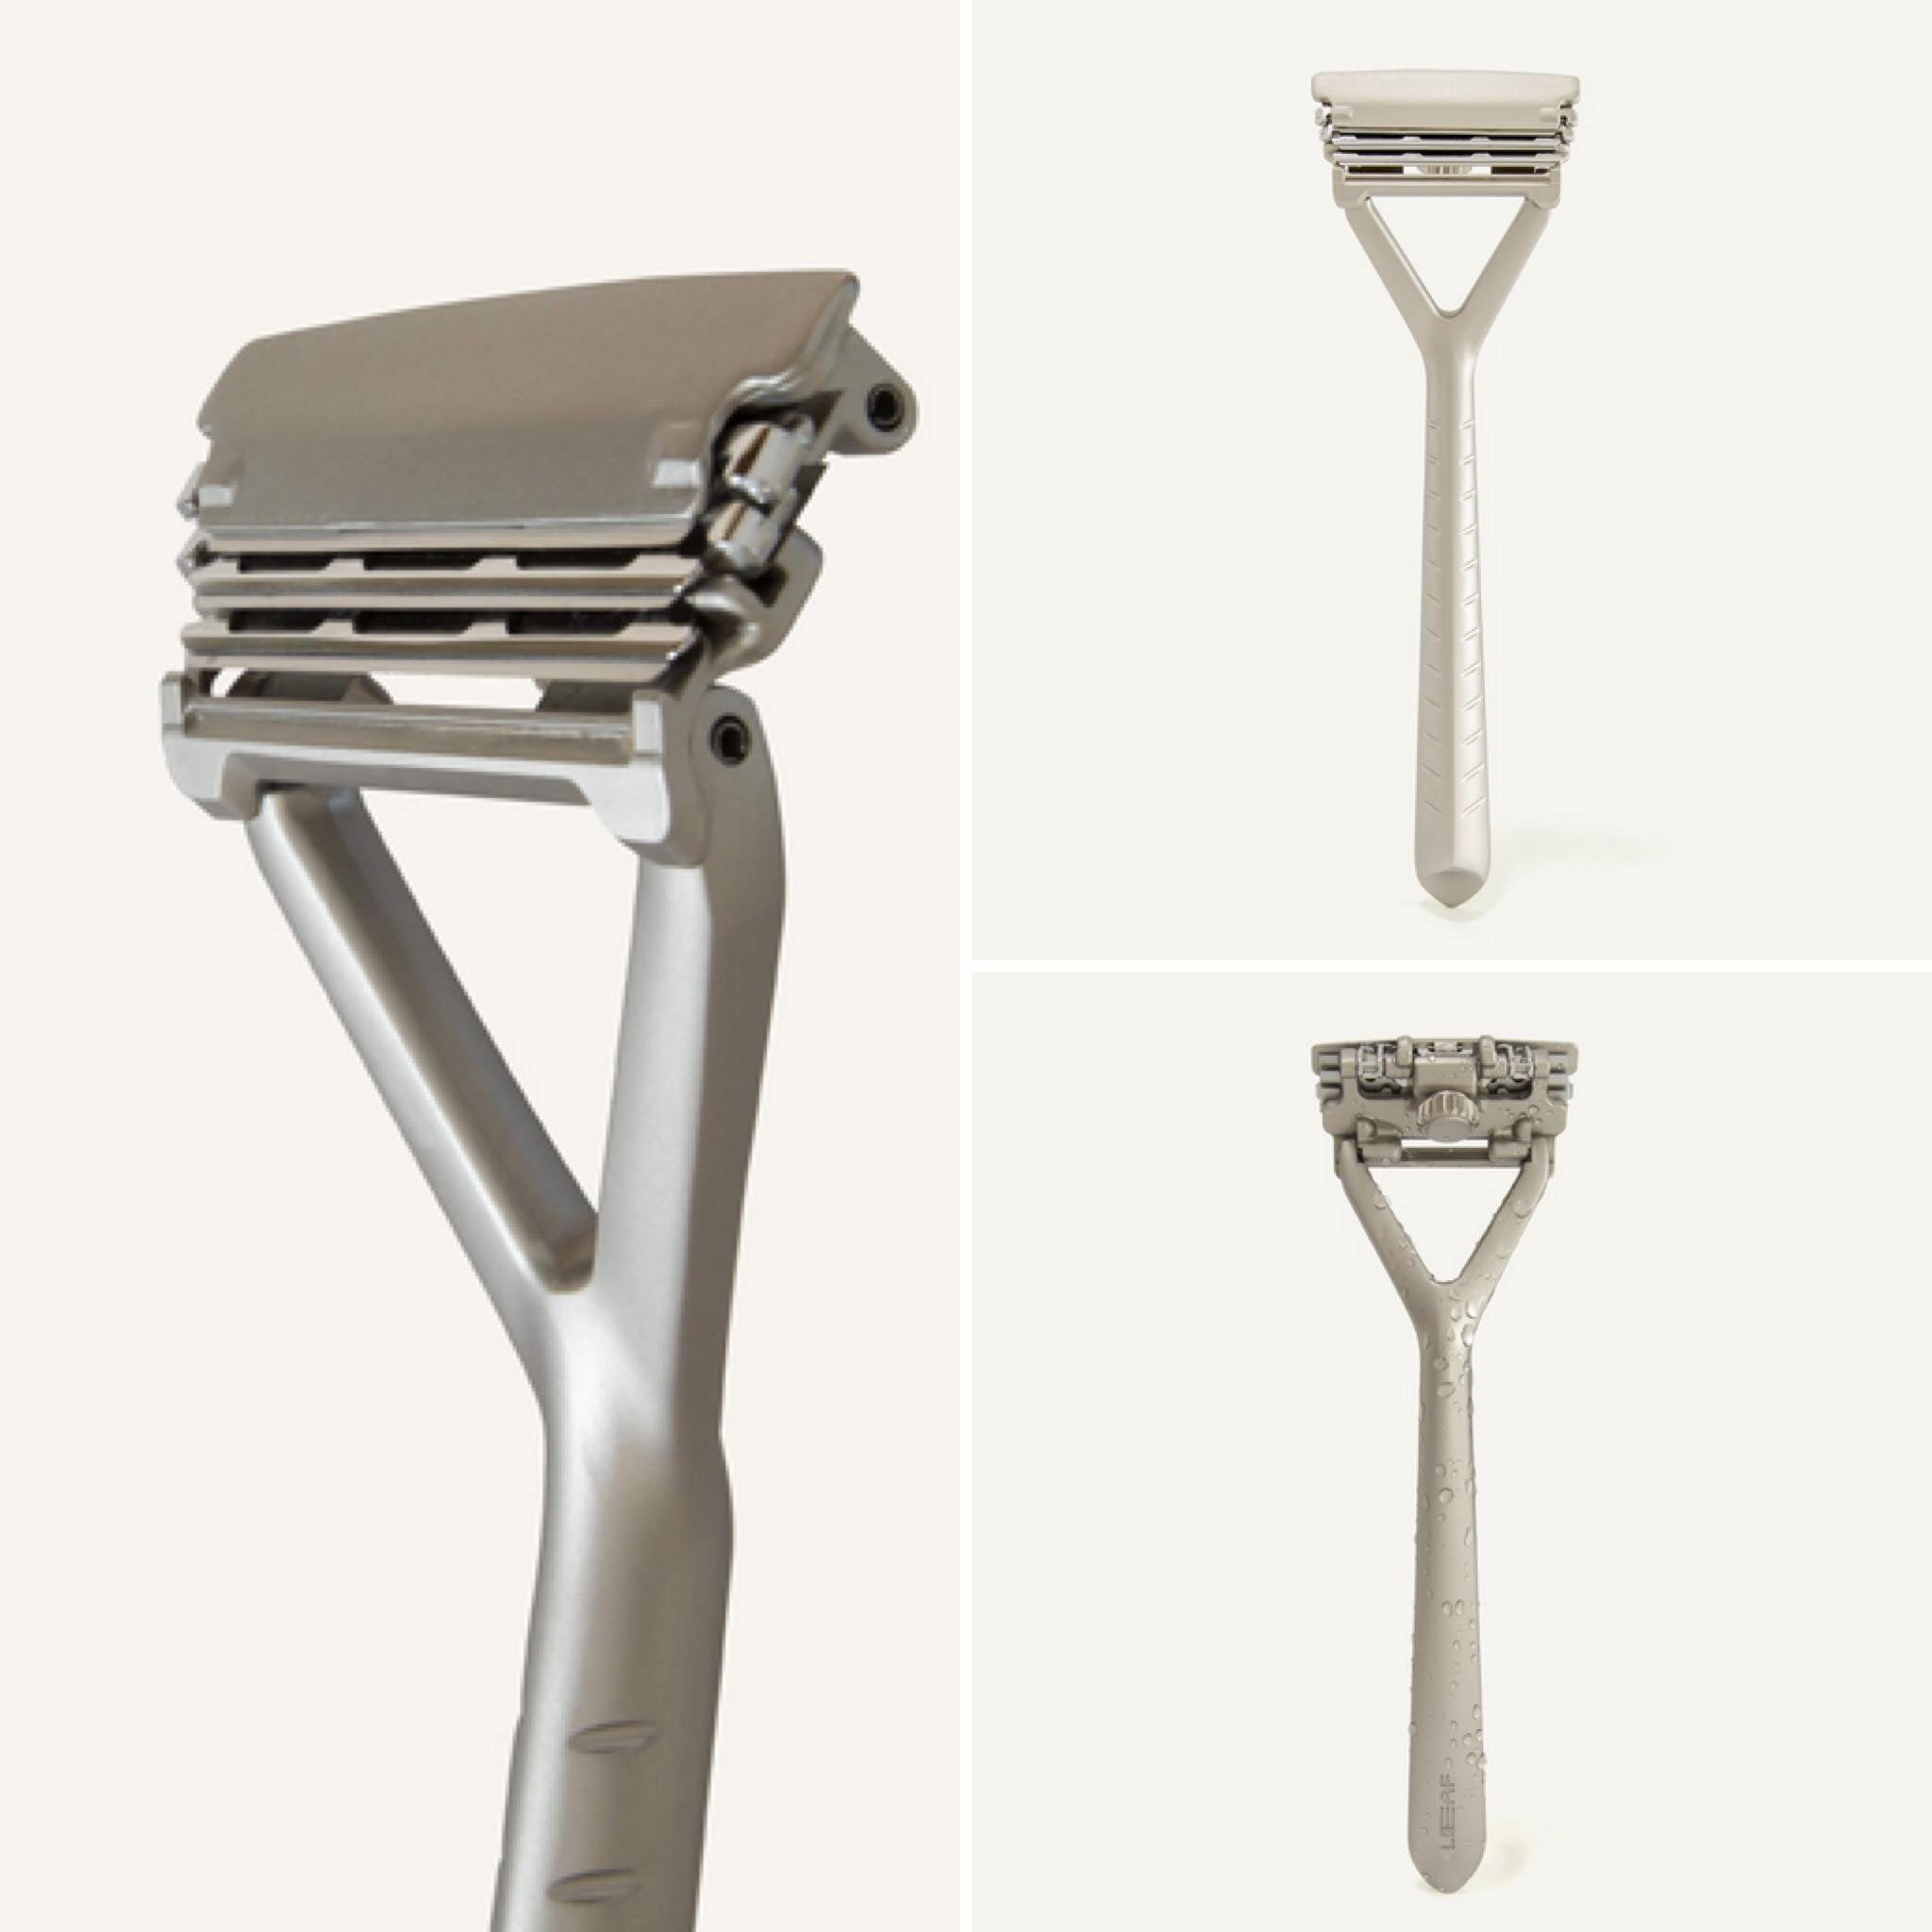 Leaf Razor with silver finish is a modern razor by Leaf Shave with a built-in pivoting heads and up to three blades for a better, more sustainable shave every time